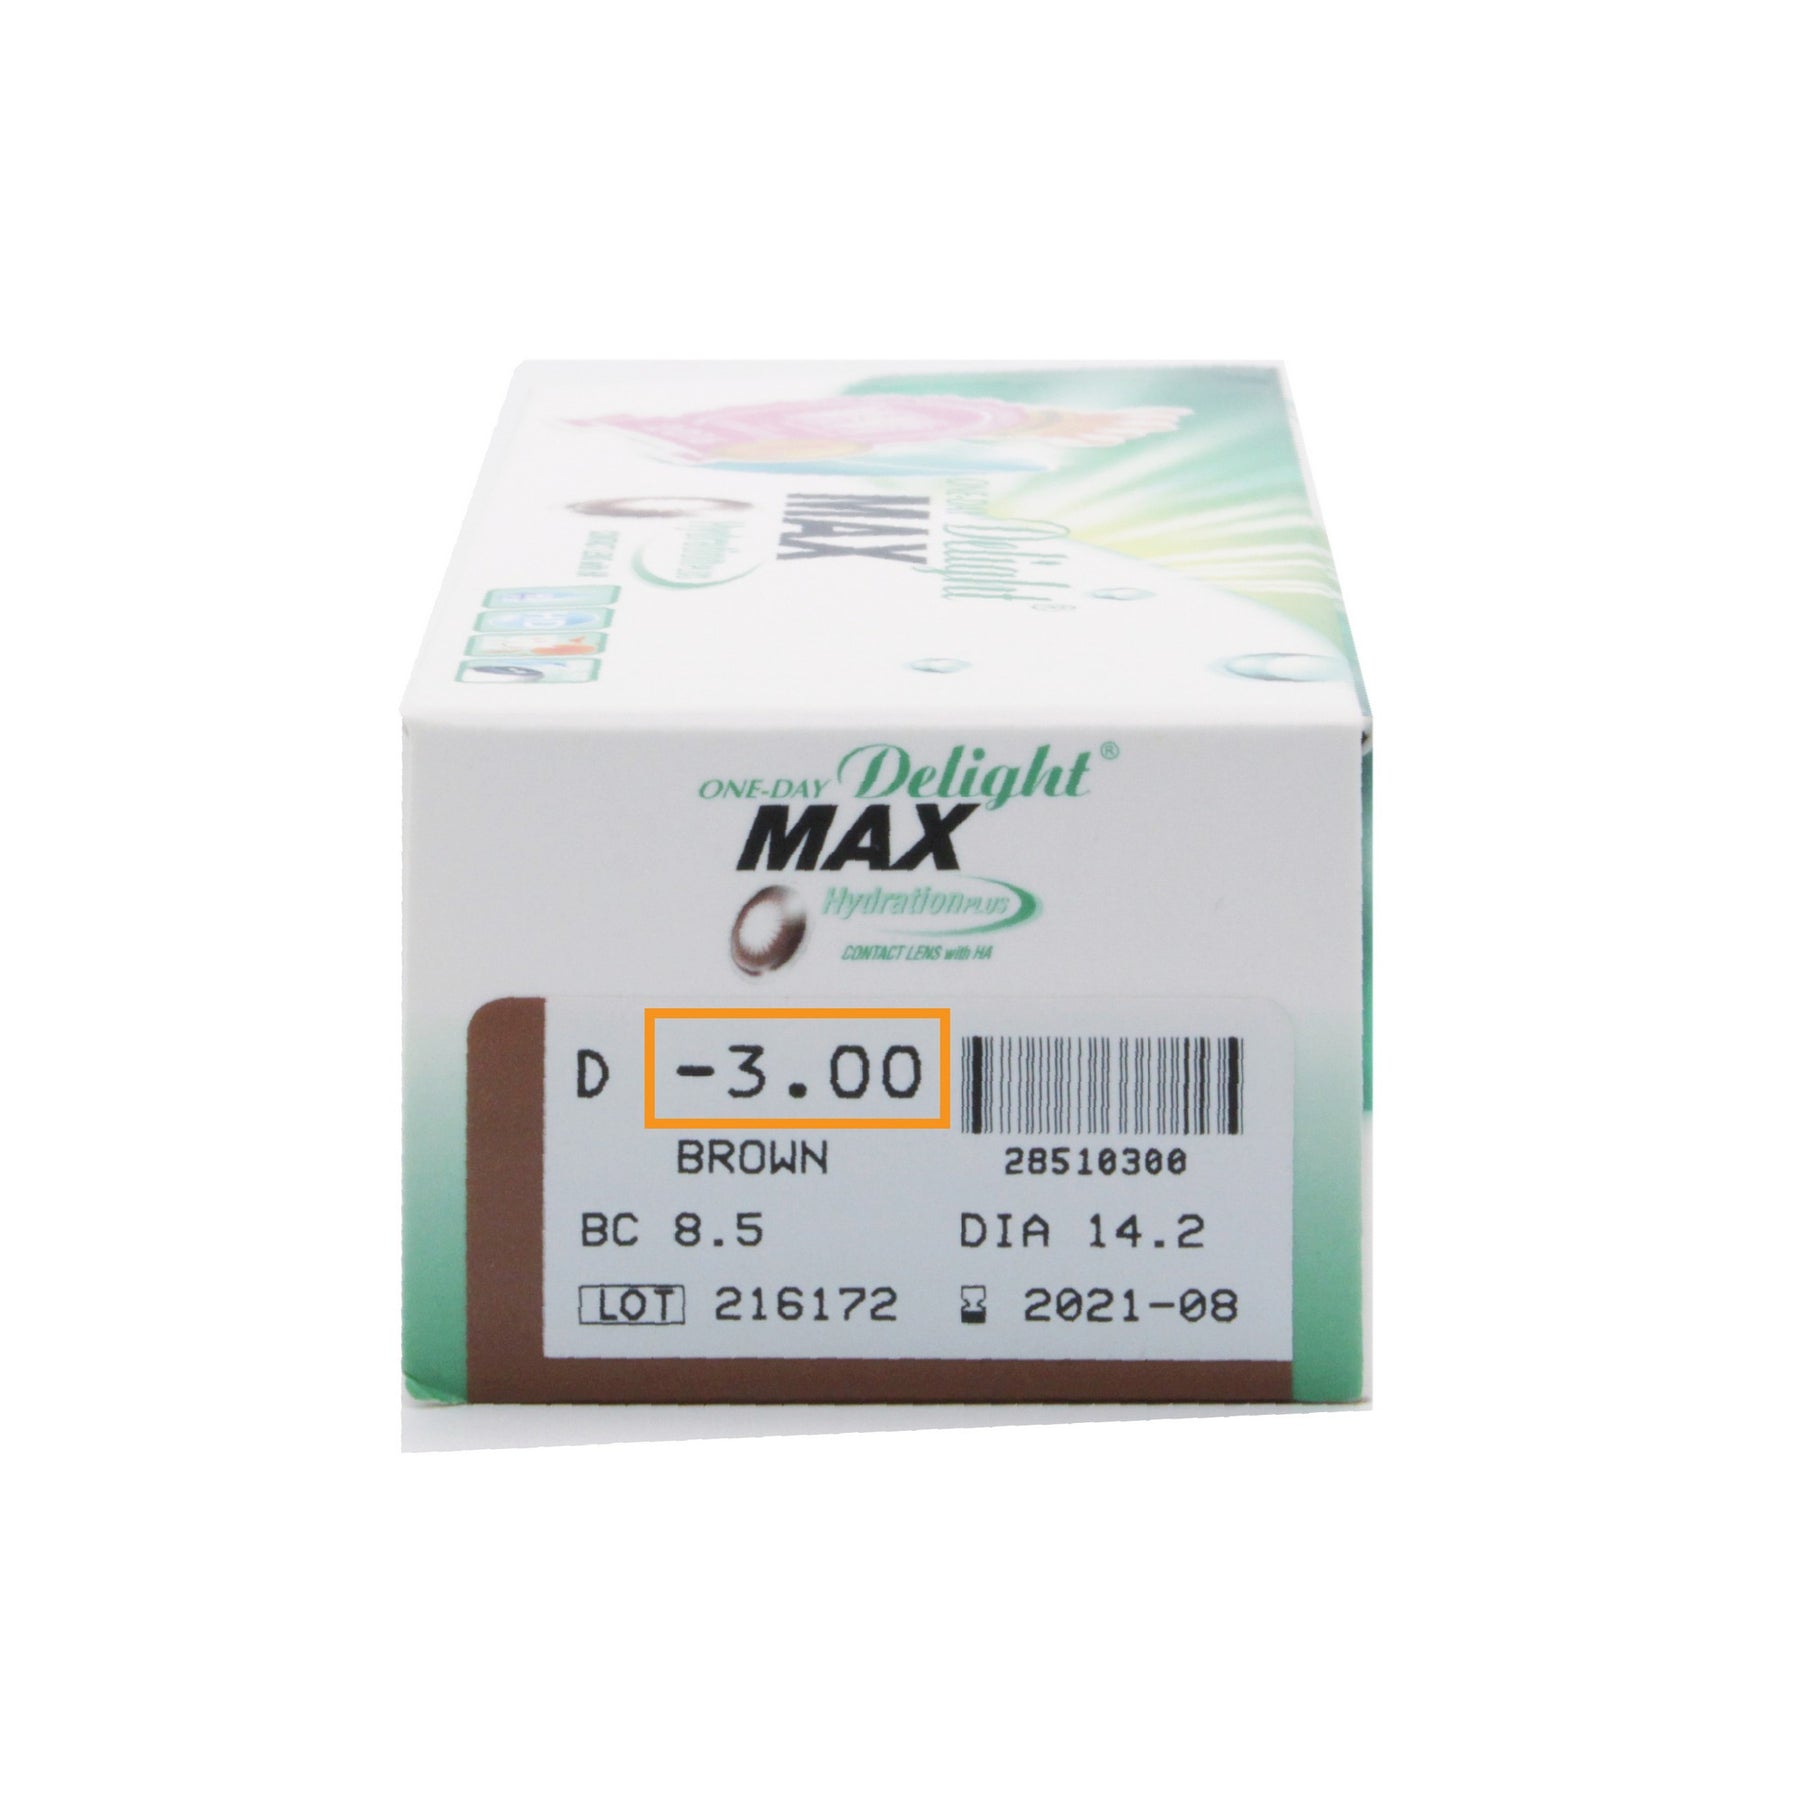 DELIGHT Max 1Day disposable colored contact lenses